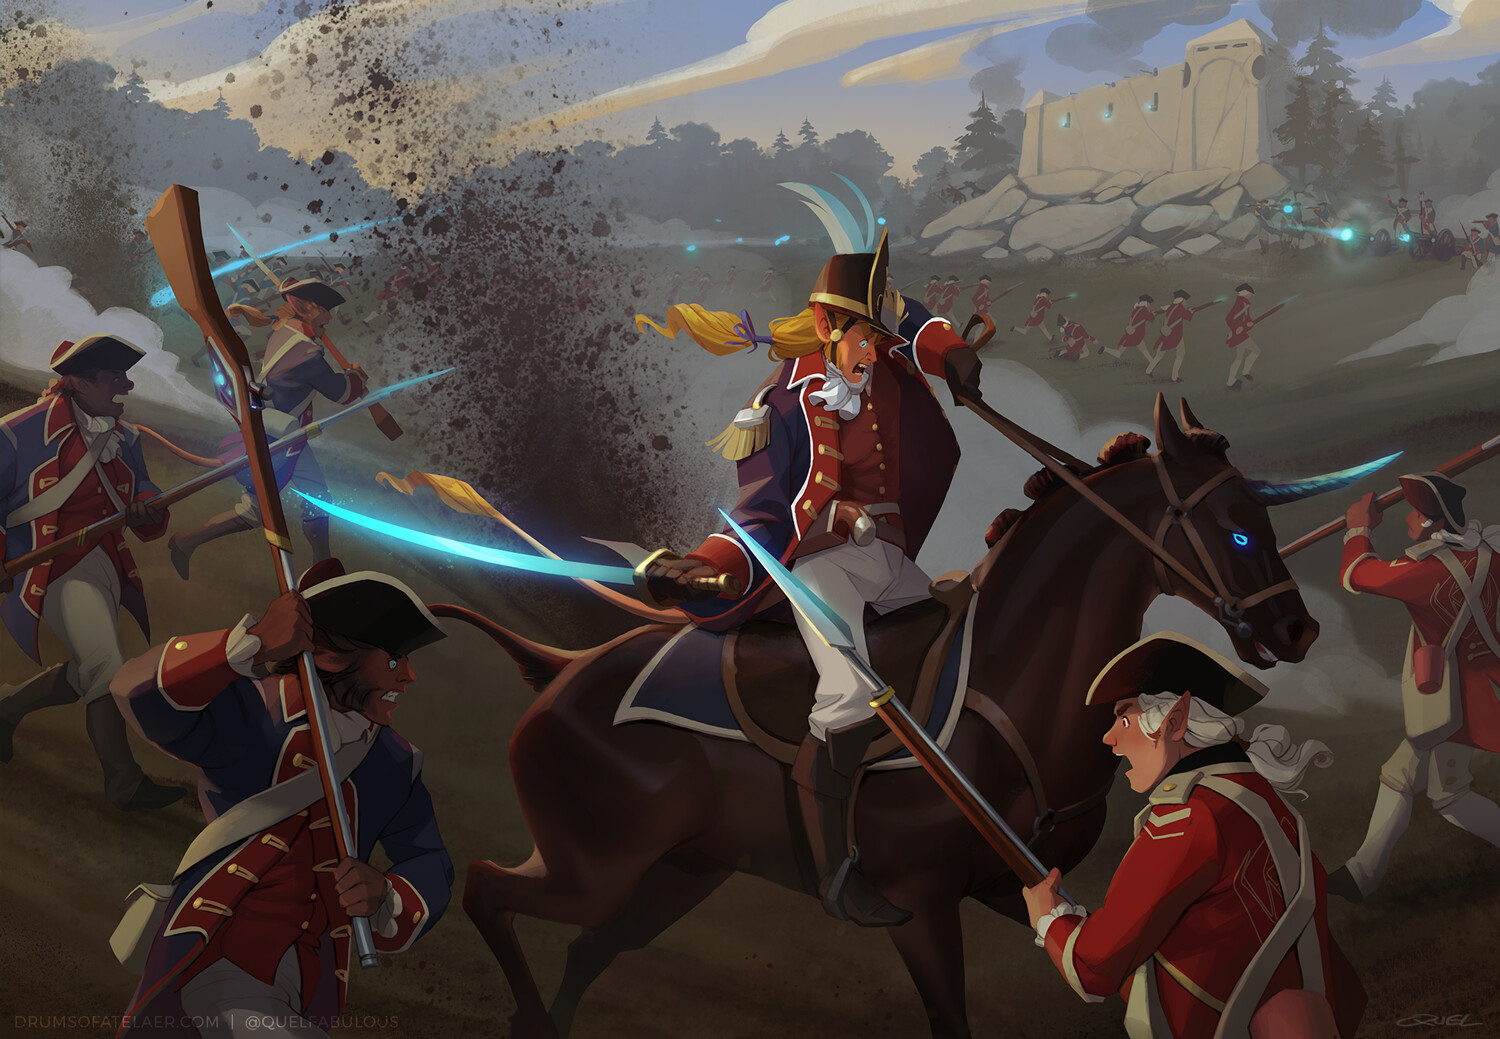 The Battle of Fort Howley